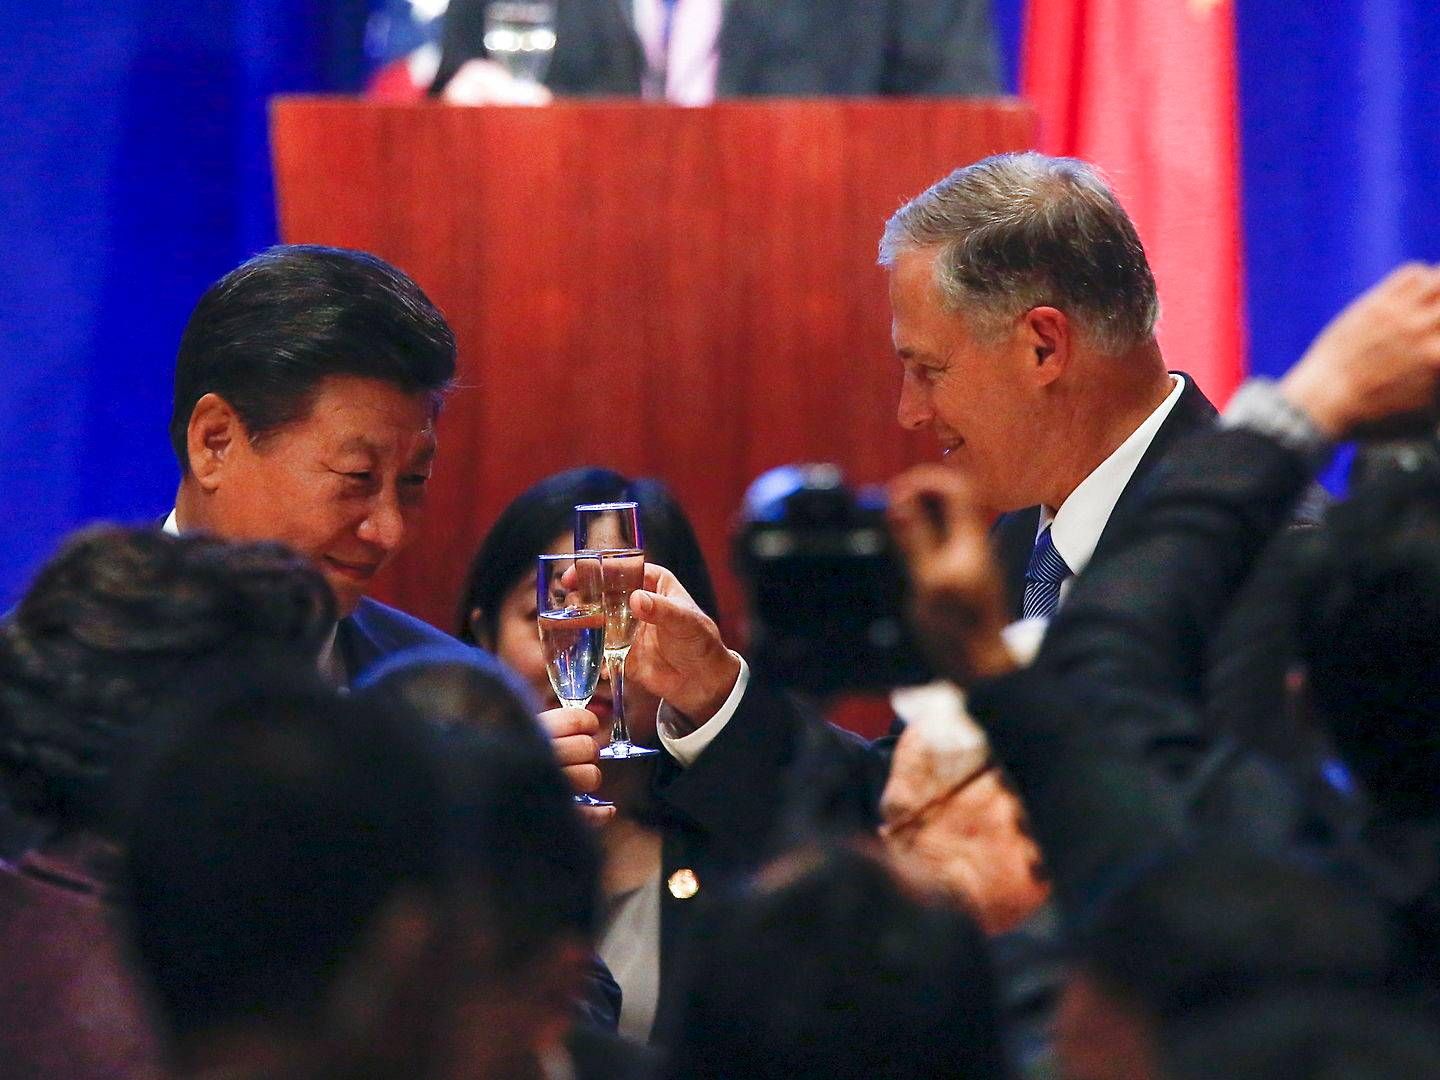 All the stops were pulled out when China's President Xi Jinping met with the Governor of Washington, Jay Inslee, in 2015. Since then, Inslee has had a change of heart in terms of a state-owned Chinese methanol plant in Kalama, Washinton. | Photo: Jason Redmond/Reuters/Ritzau Scanpix